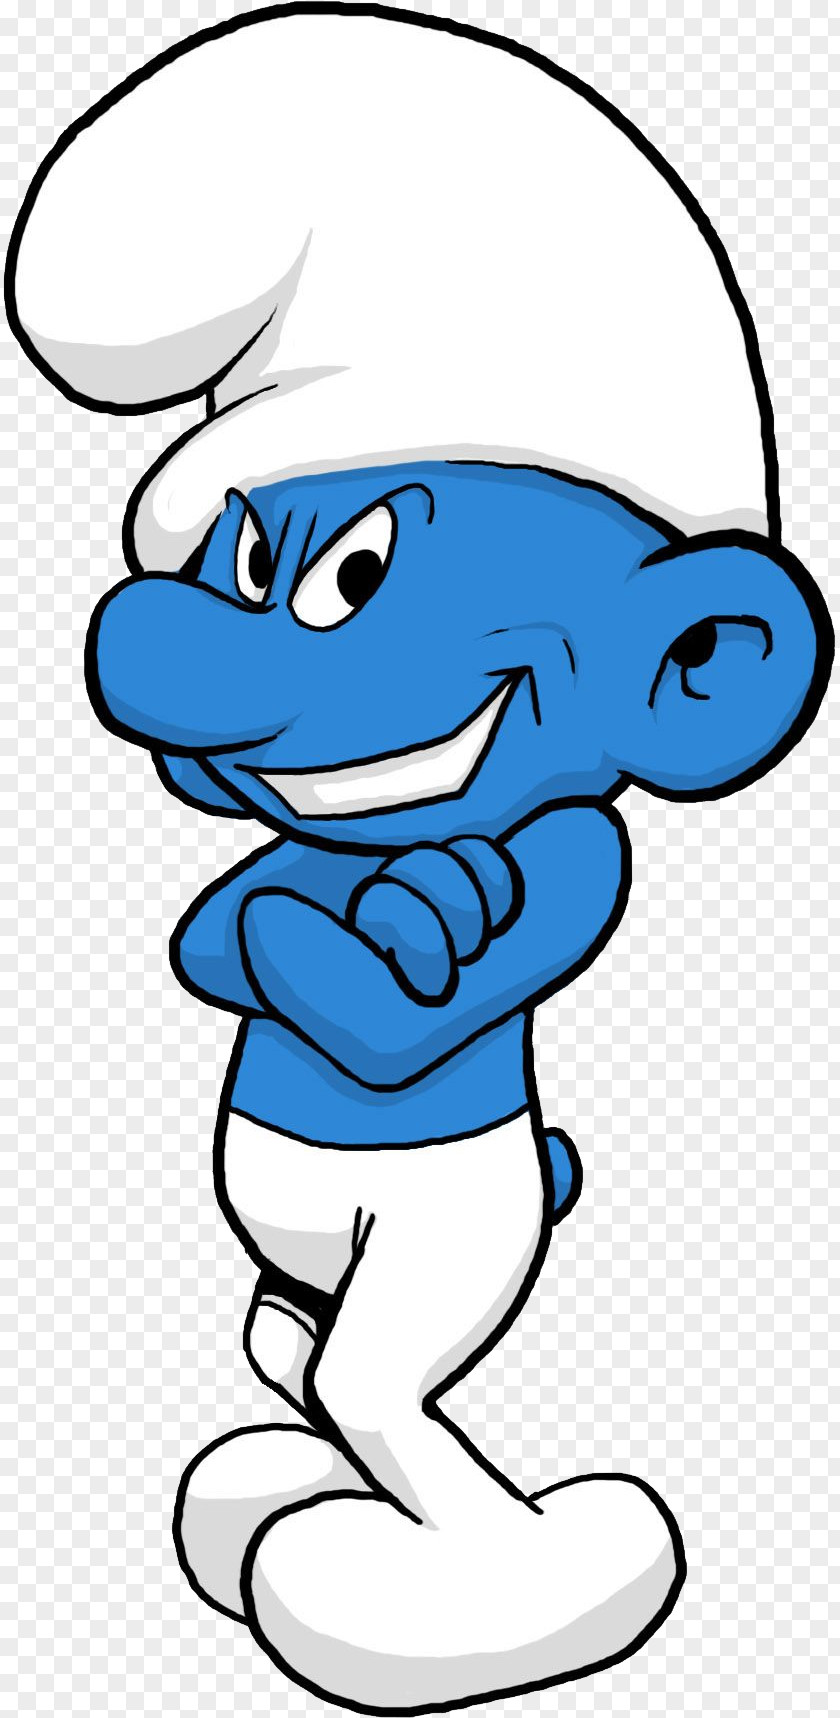 Smurf The Smurflings Smurfs Character Luilaksmurf Clip Art PNG